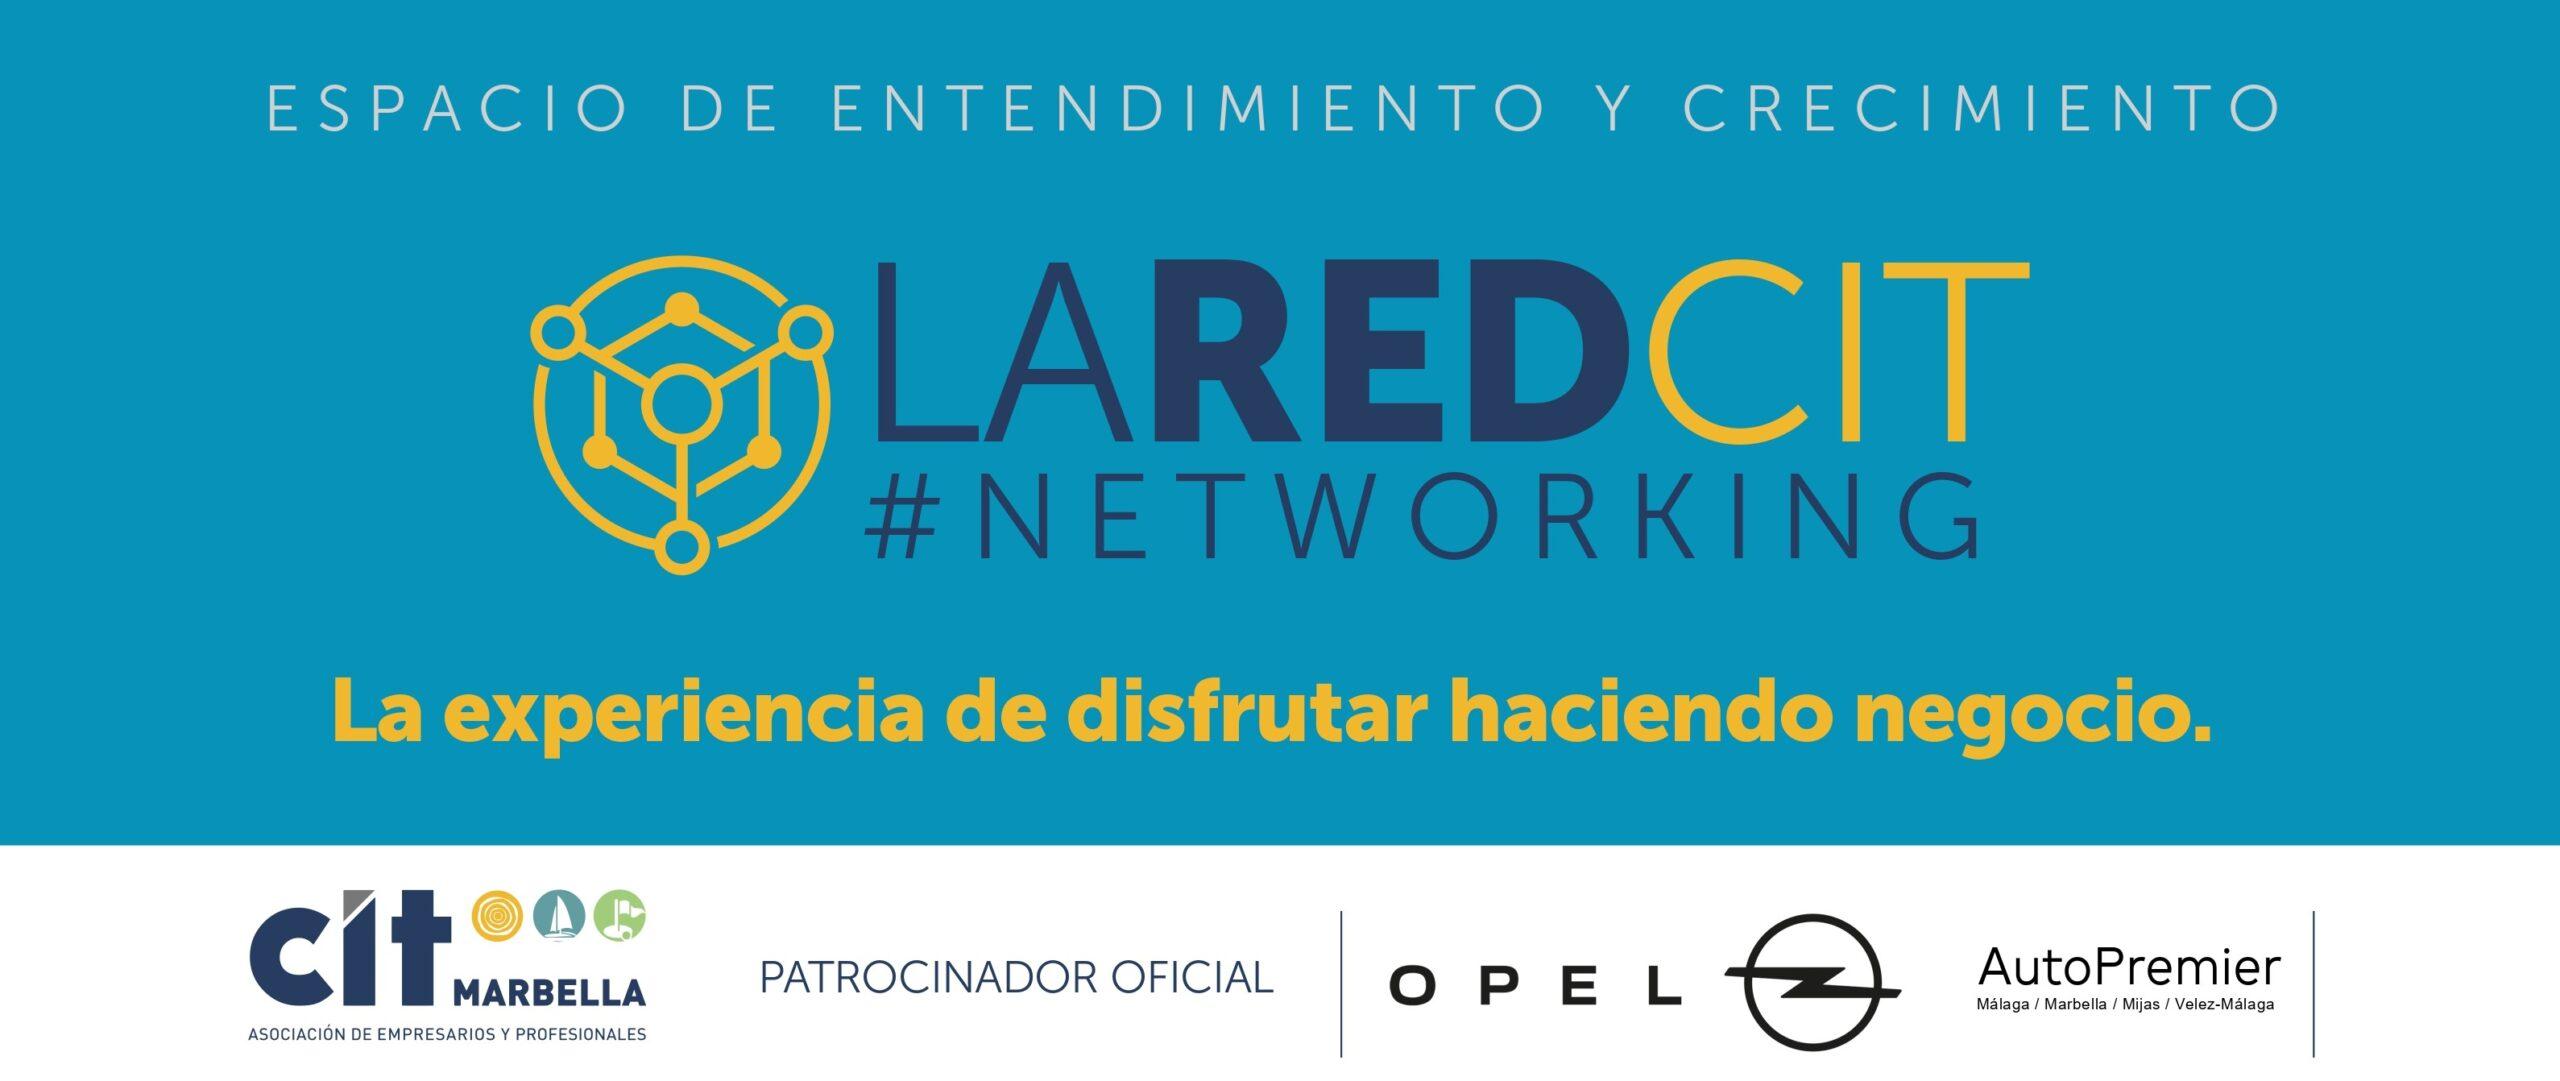 LA RED CIT #NETWORKING/ OUR SPACE